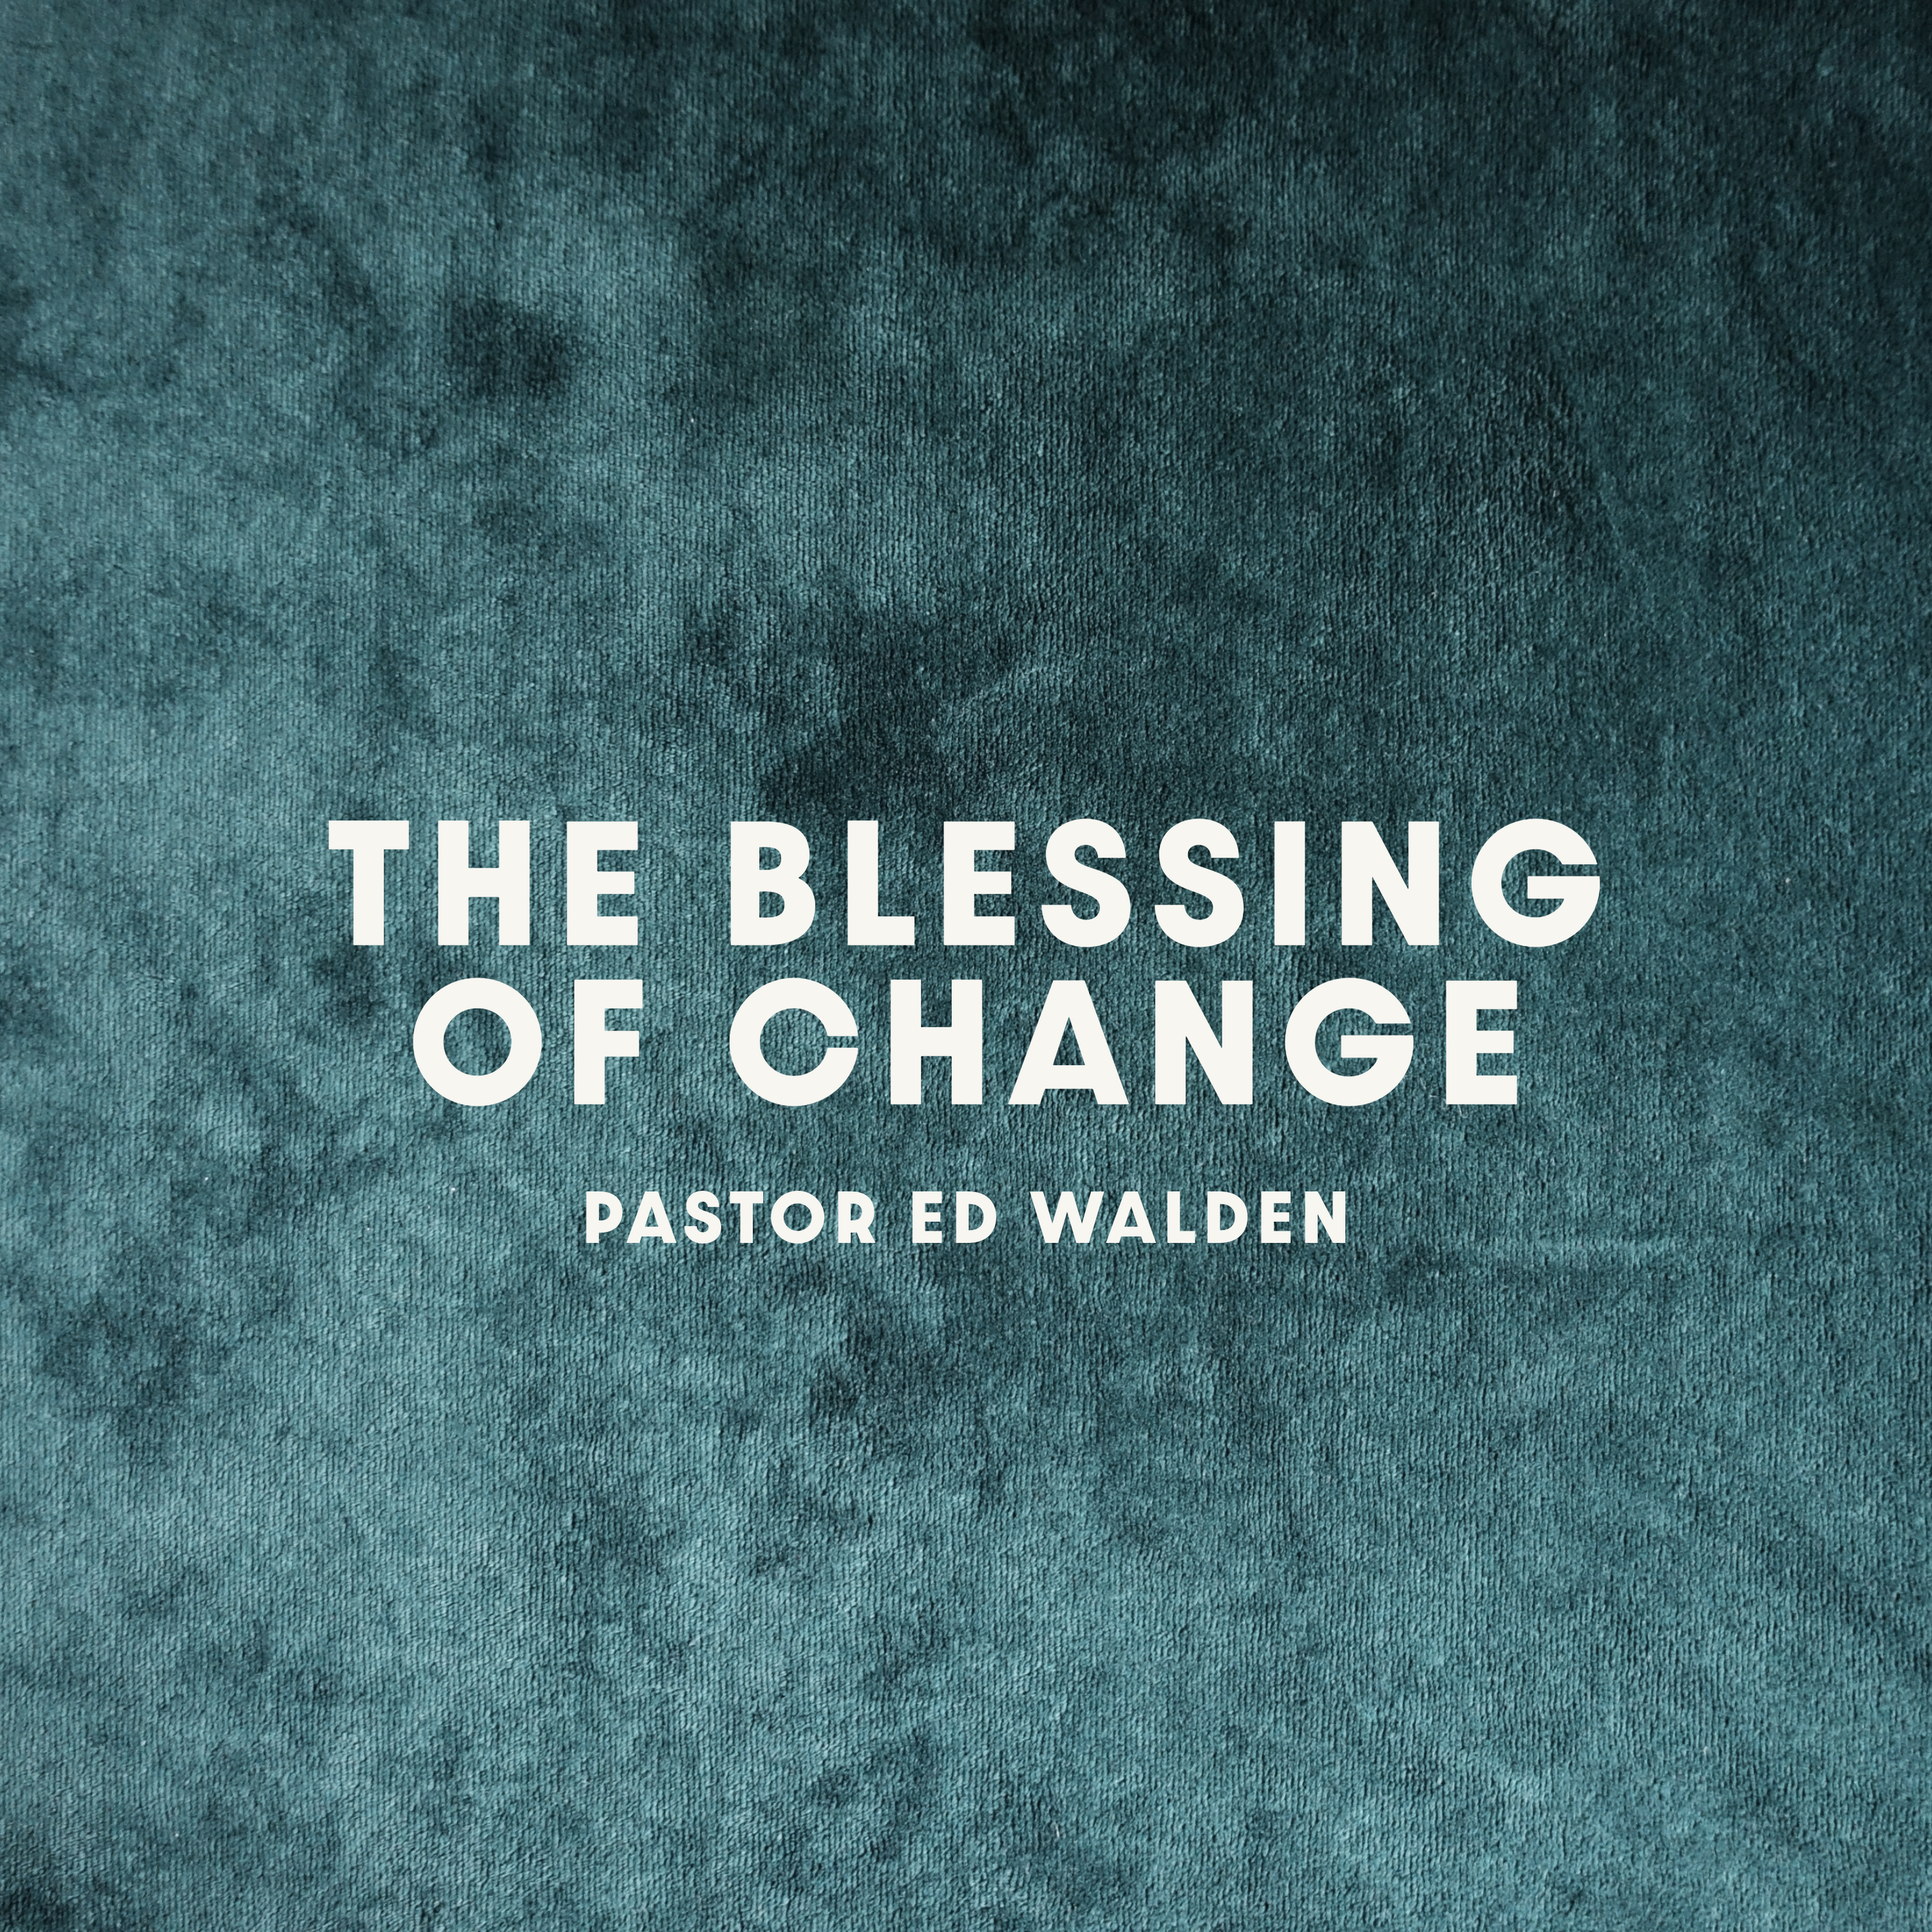 The Blessing of Change